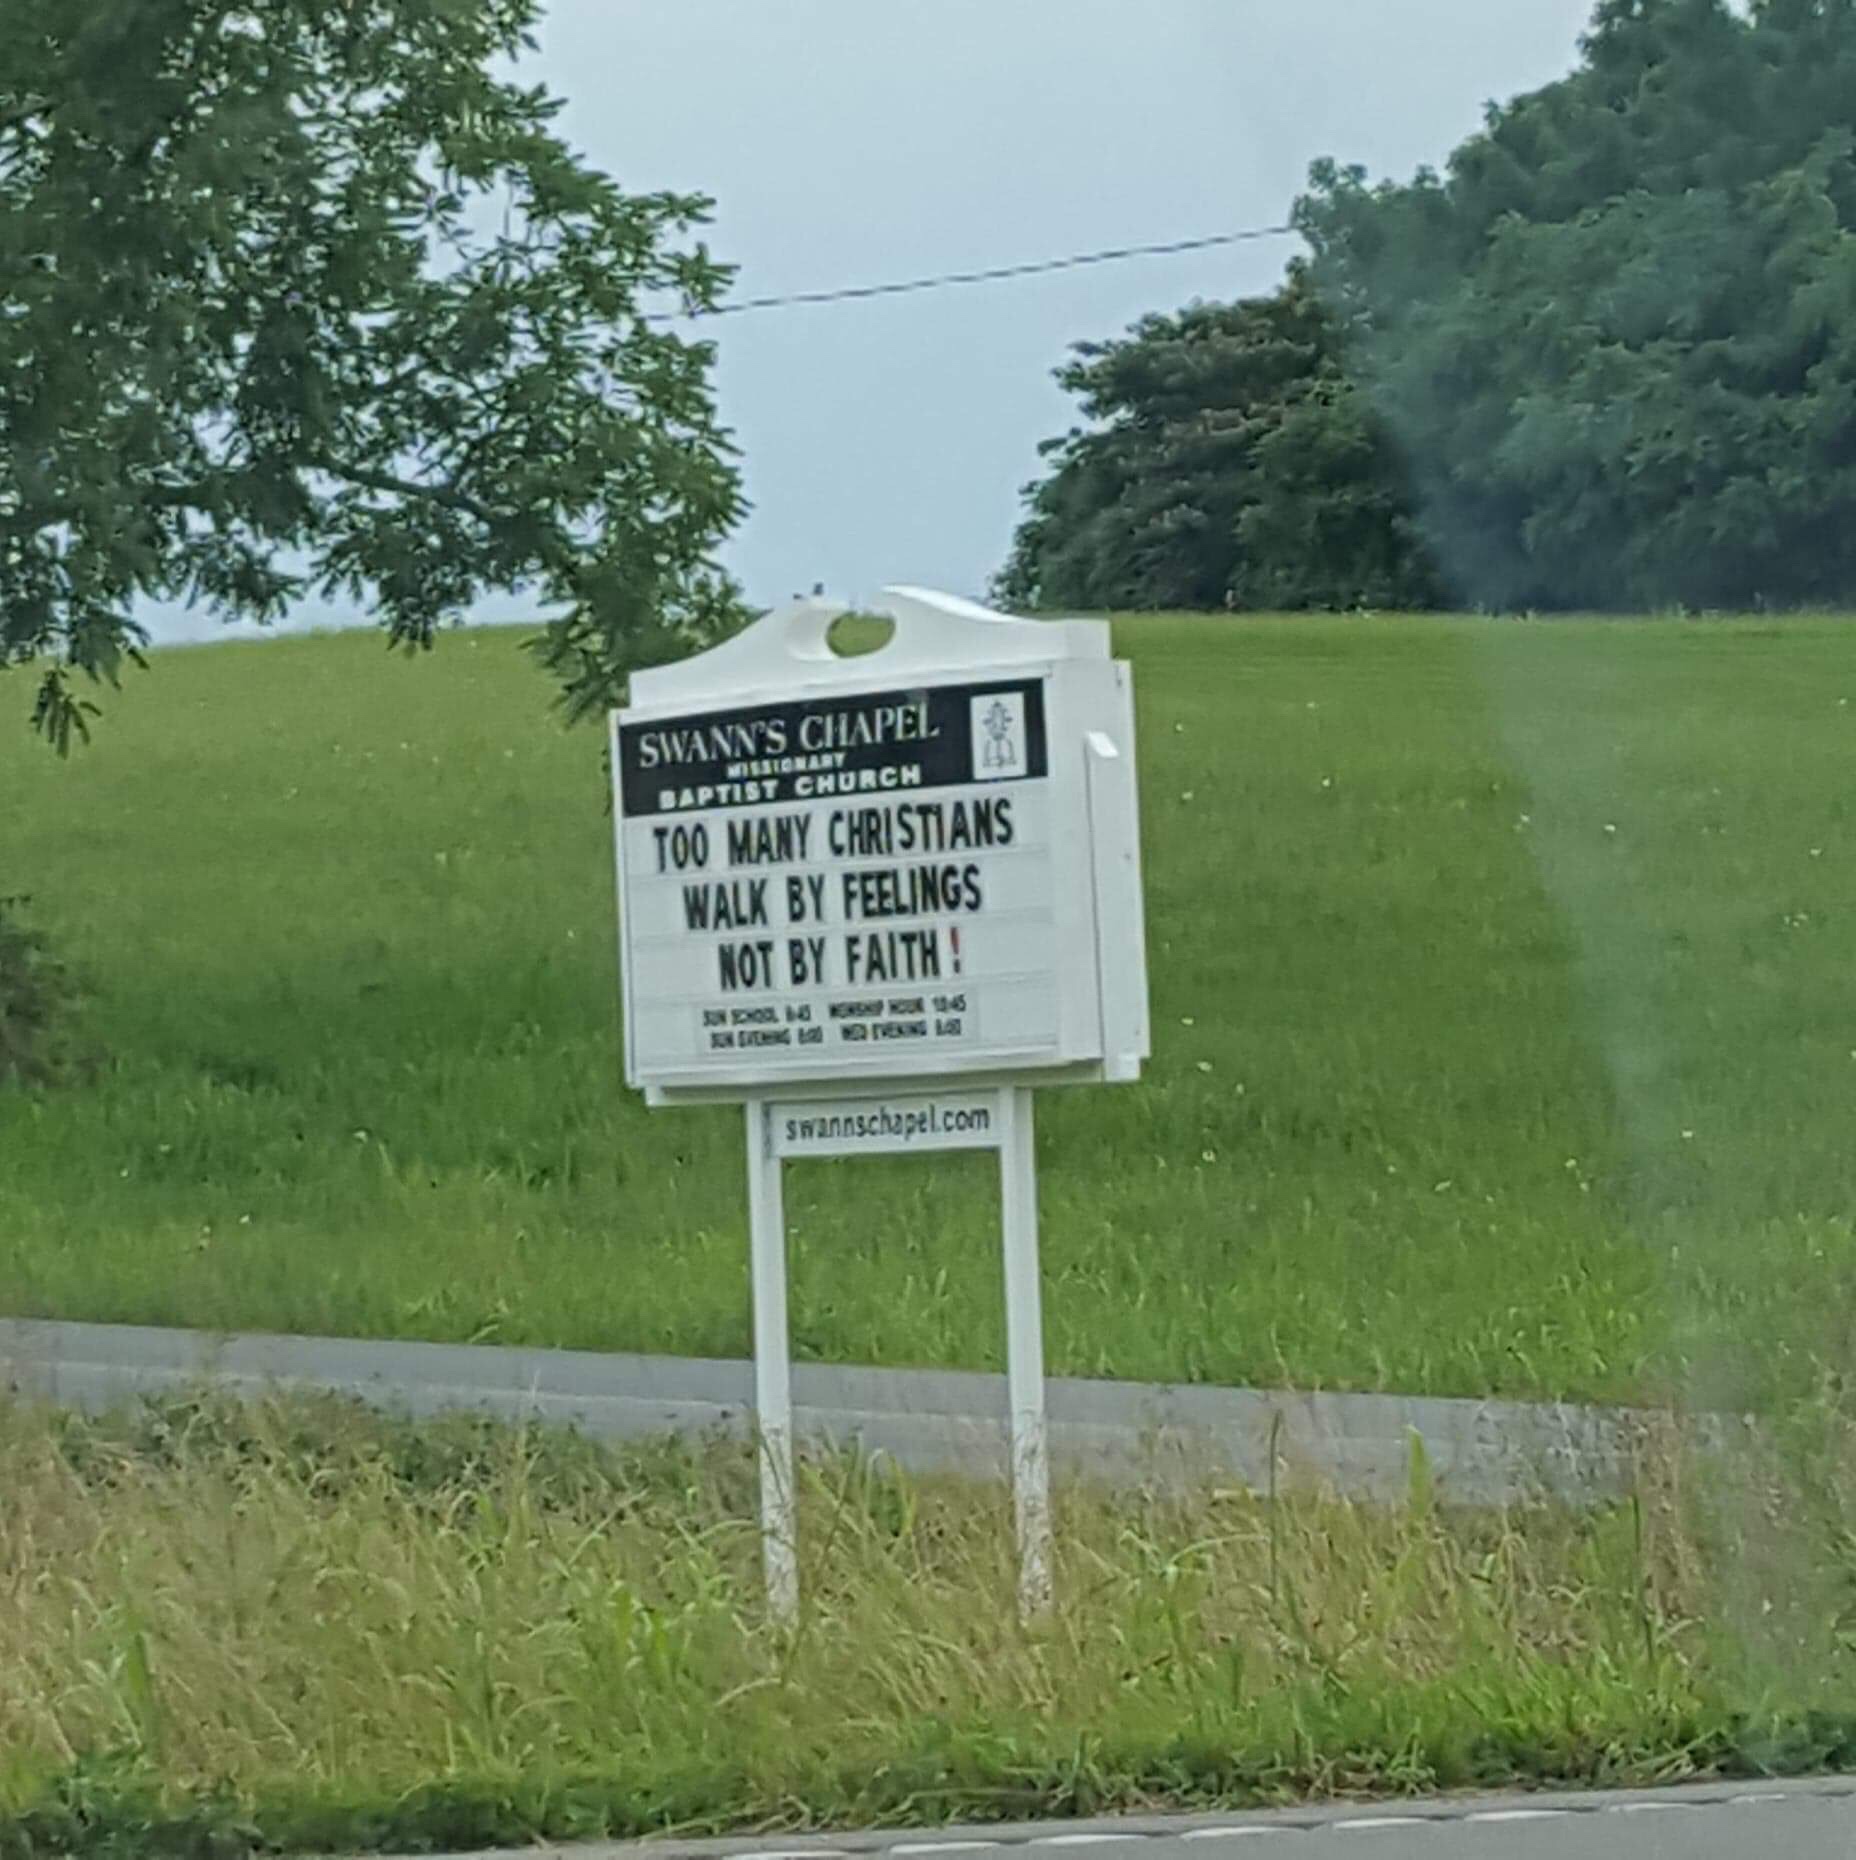 Too Many Christians Church Sign is this weeks Church Sign Saturday feature. From Swanns Chapel Missionary Baptist Church. Too many Christians walk by Feelings not by Faith!